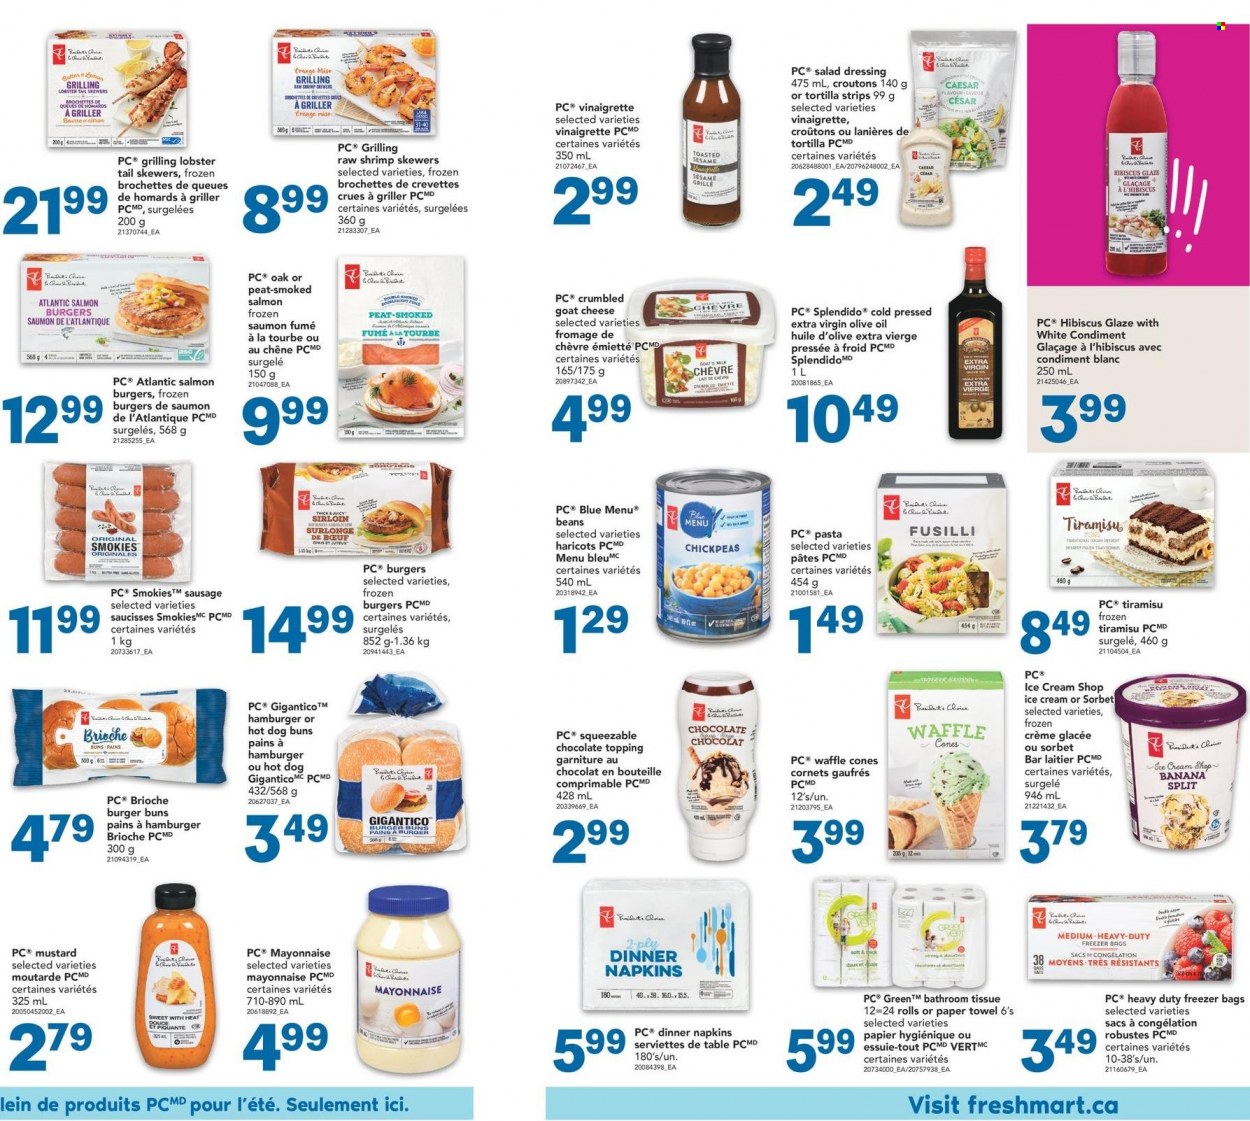 thumbnail - Freshmart Flyer - May 19, 2022 - July 13, 2022 - Sales products - tortillas, buns, burger buns, brioche, tiramisu, beans, lobster, salmon, smoked salmon, lobster tail, shrimps, pasta, sausage, goat cheese, Président, mayonnaise, ice cream, croutons, topping, chickpeas, mustard, salad dressing, vinaigrette dressing, dressing, extra virgin olive oil, olive oil, oil, napkins, bath tissue, paper towels, bag, Raid. Page 3.